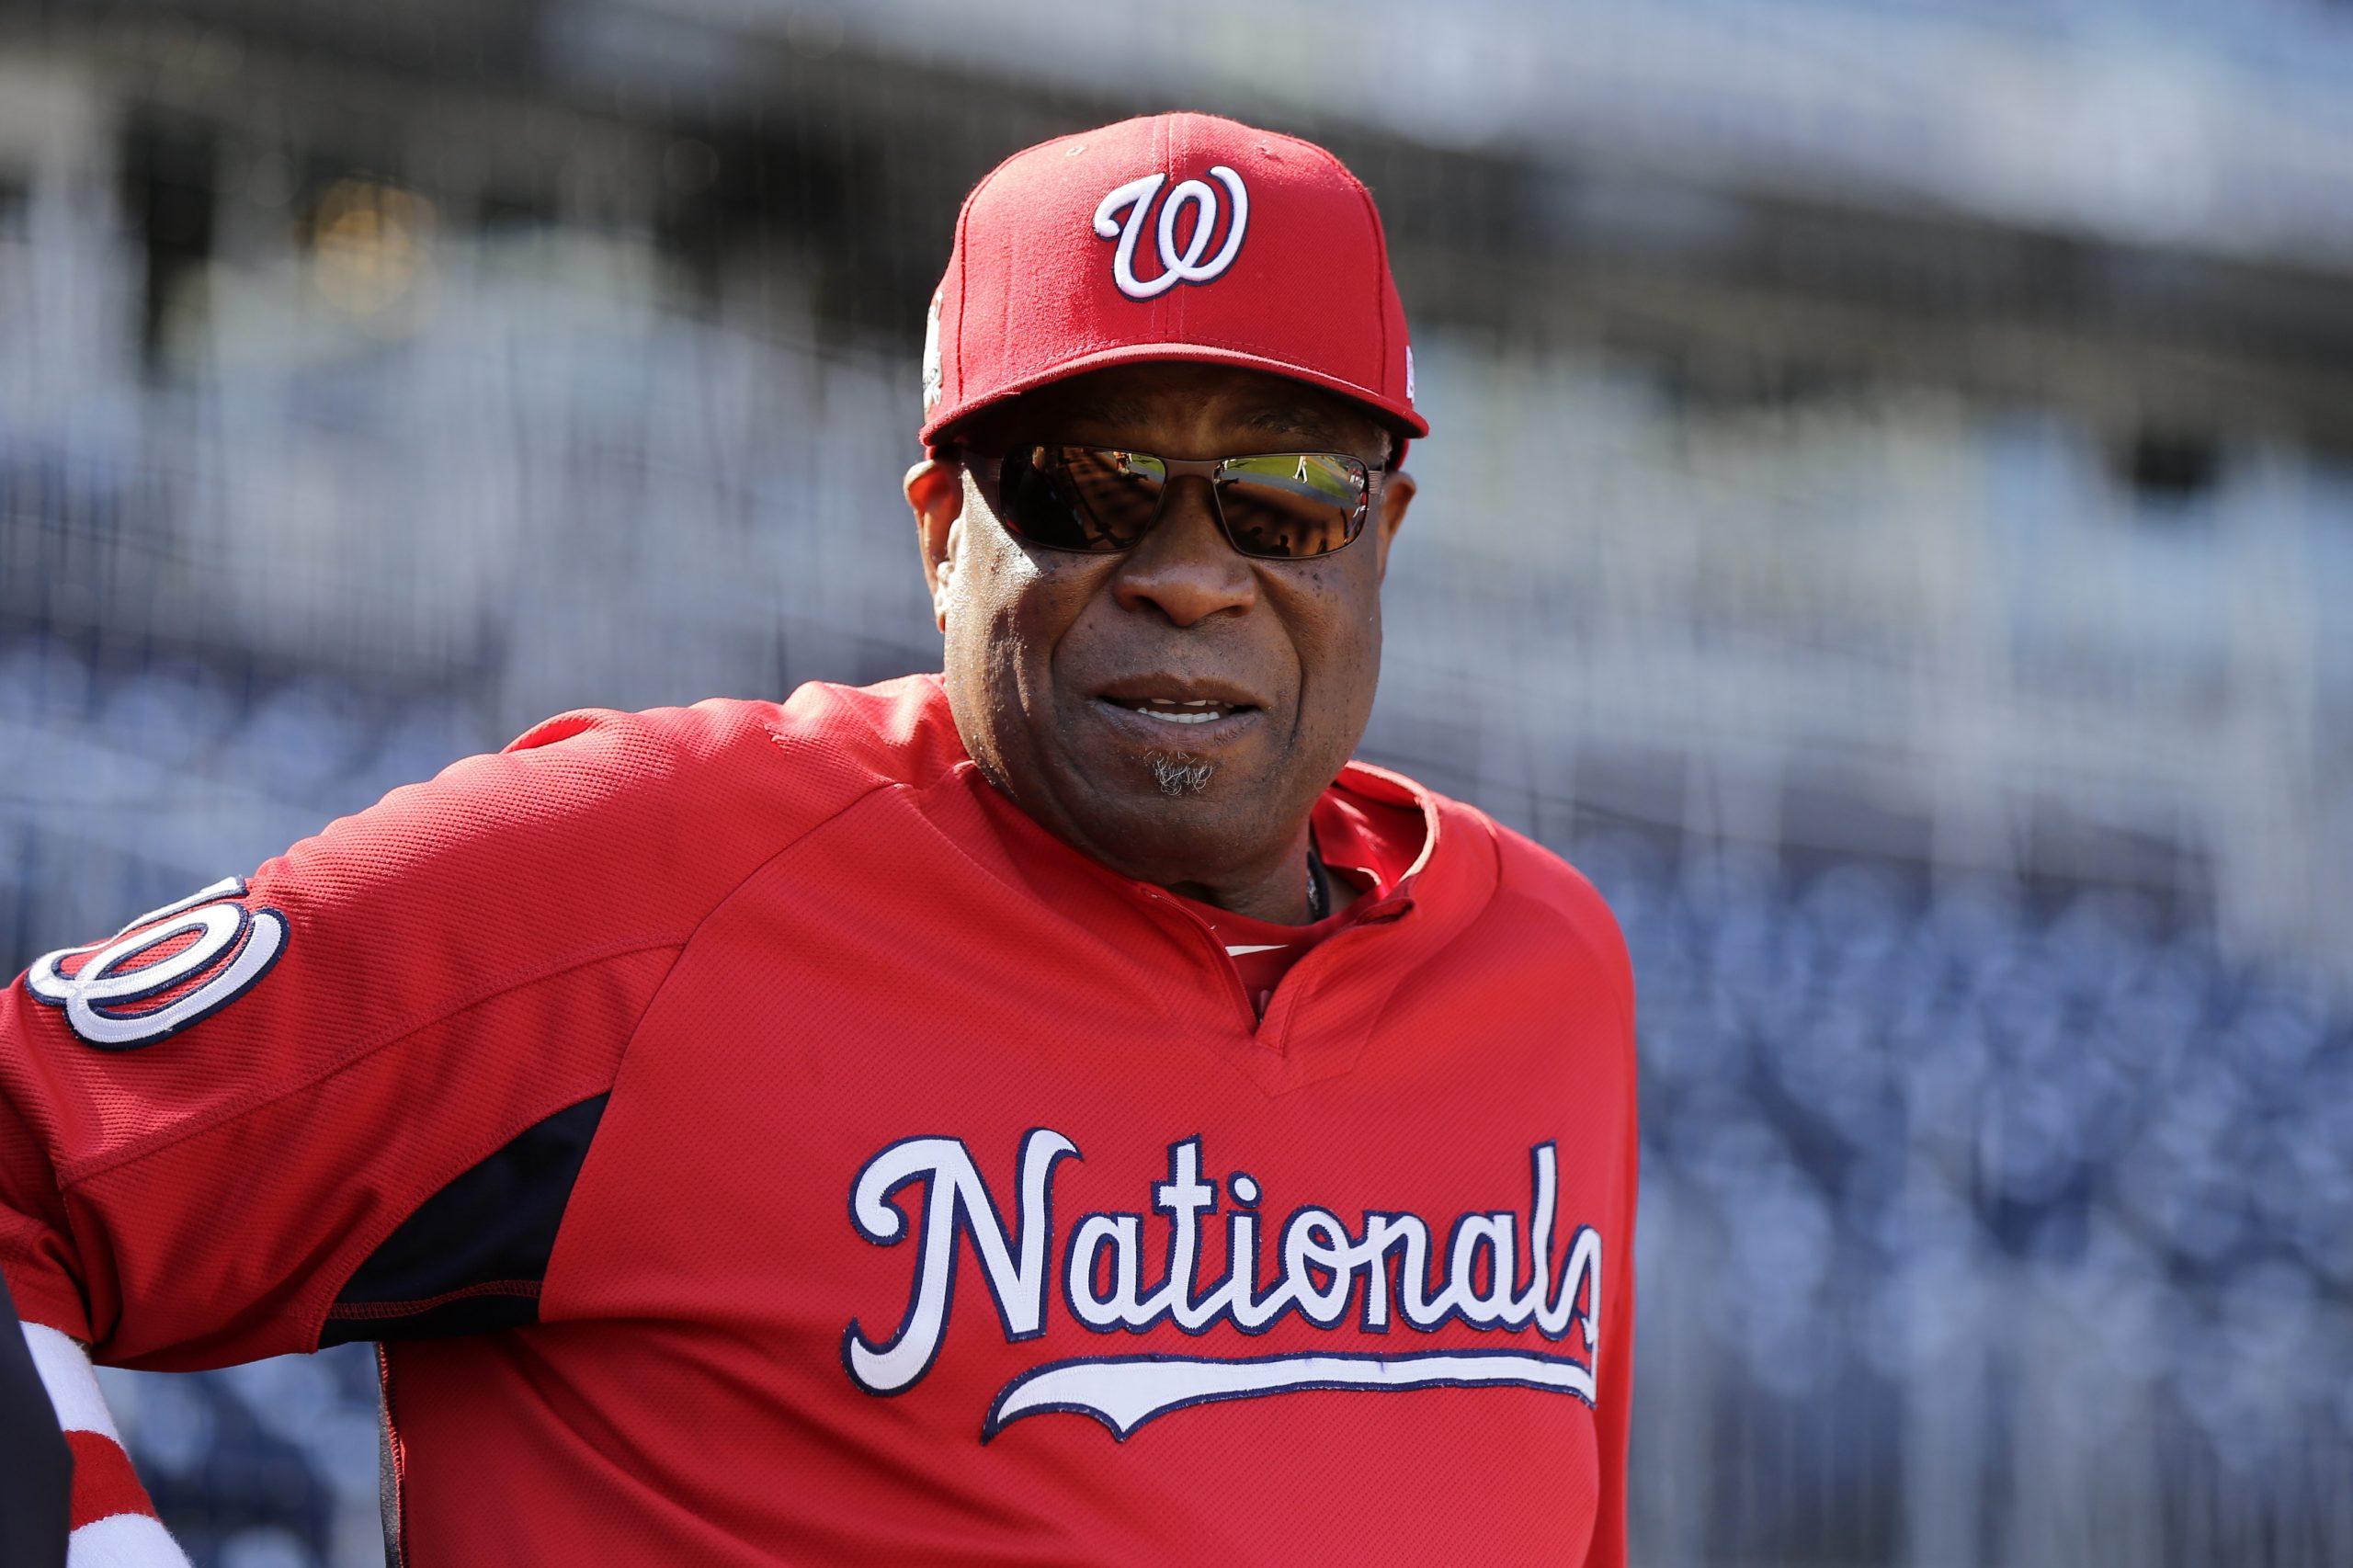 Dusty Baker reaches 2,000 managerial wins